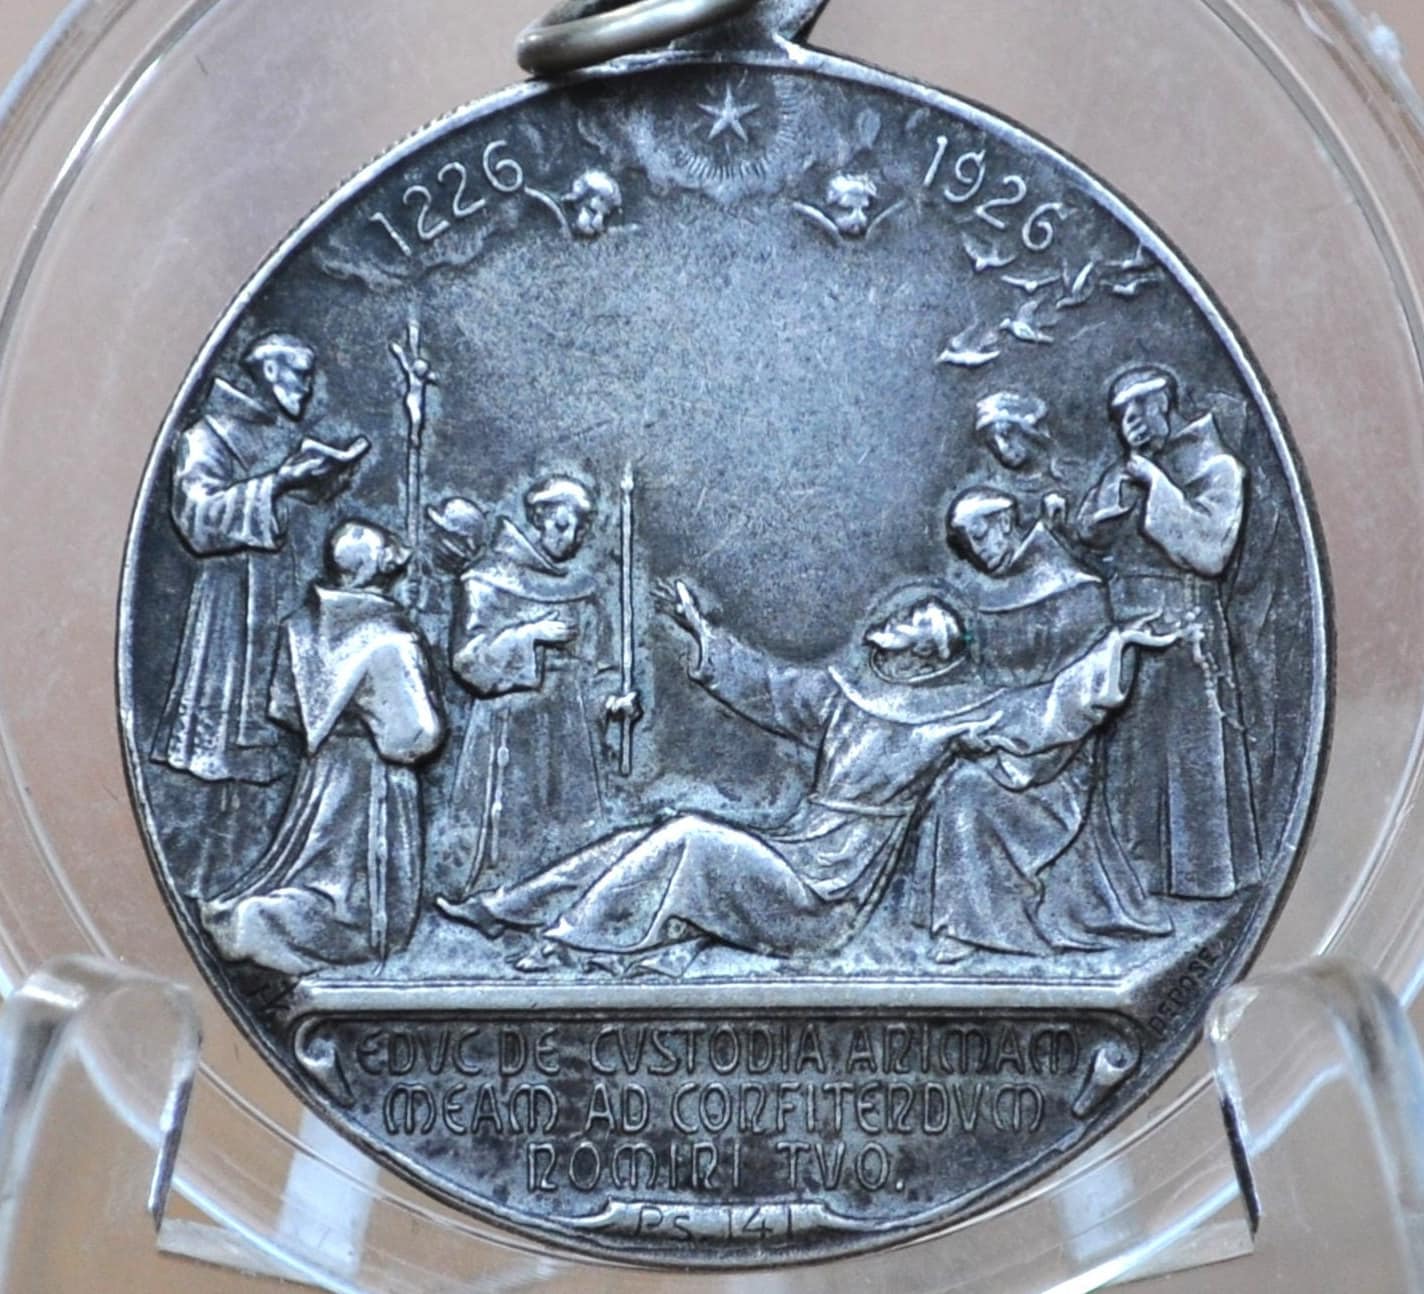 Beautiful 1926 Sterling Saint Francis of Assisi Medal - Vintage Catholic Medallion - Francesco d'Assisi, Psalm 141, Silver Religious Pendent